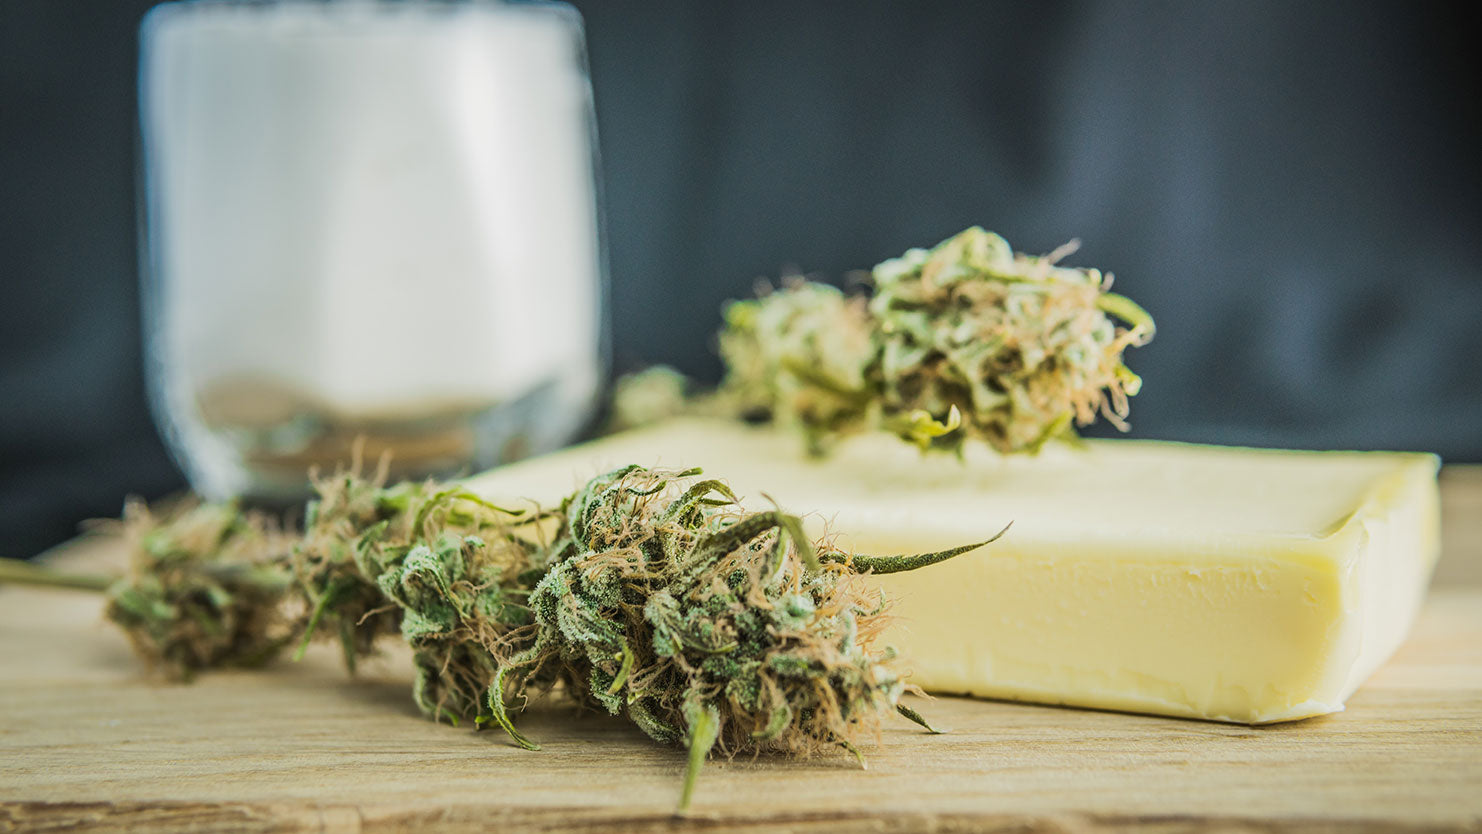 How to Make Cannabutter with CBD Flower A Step-By-Step Guide